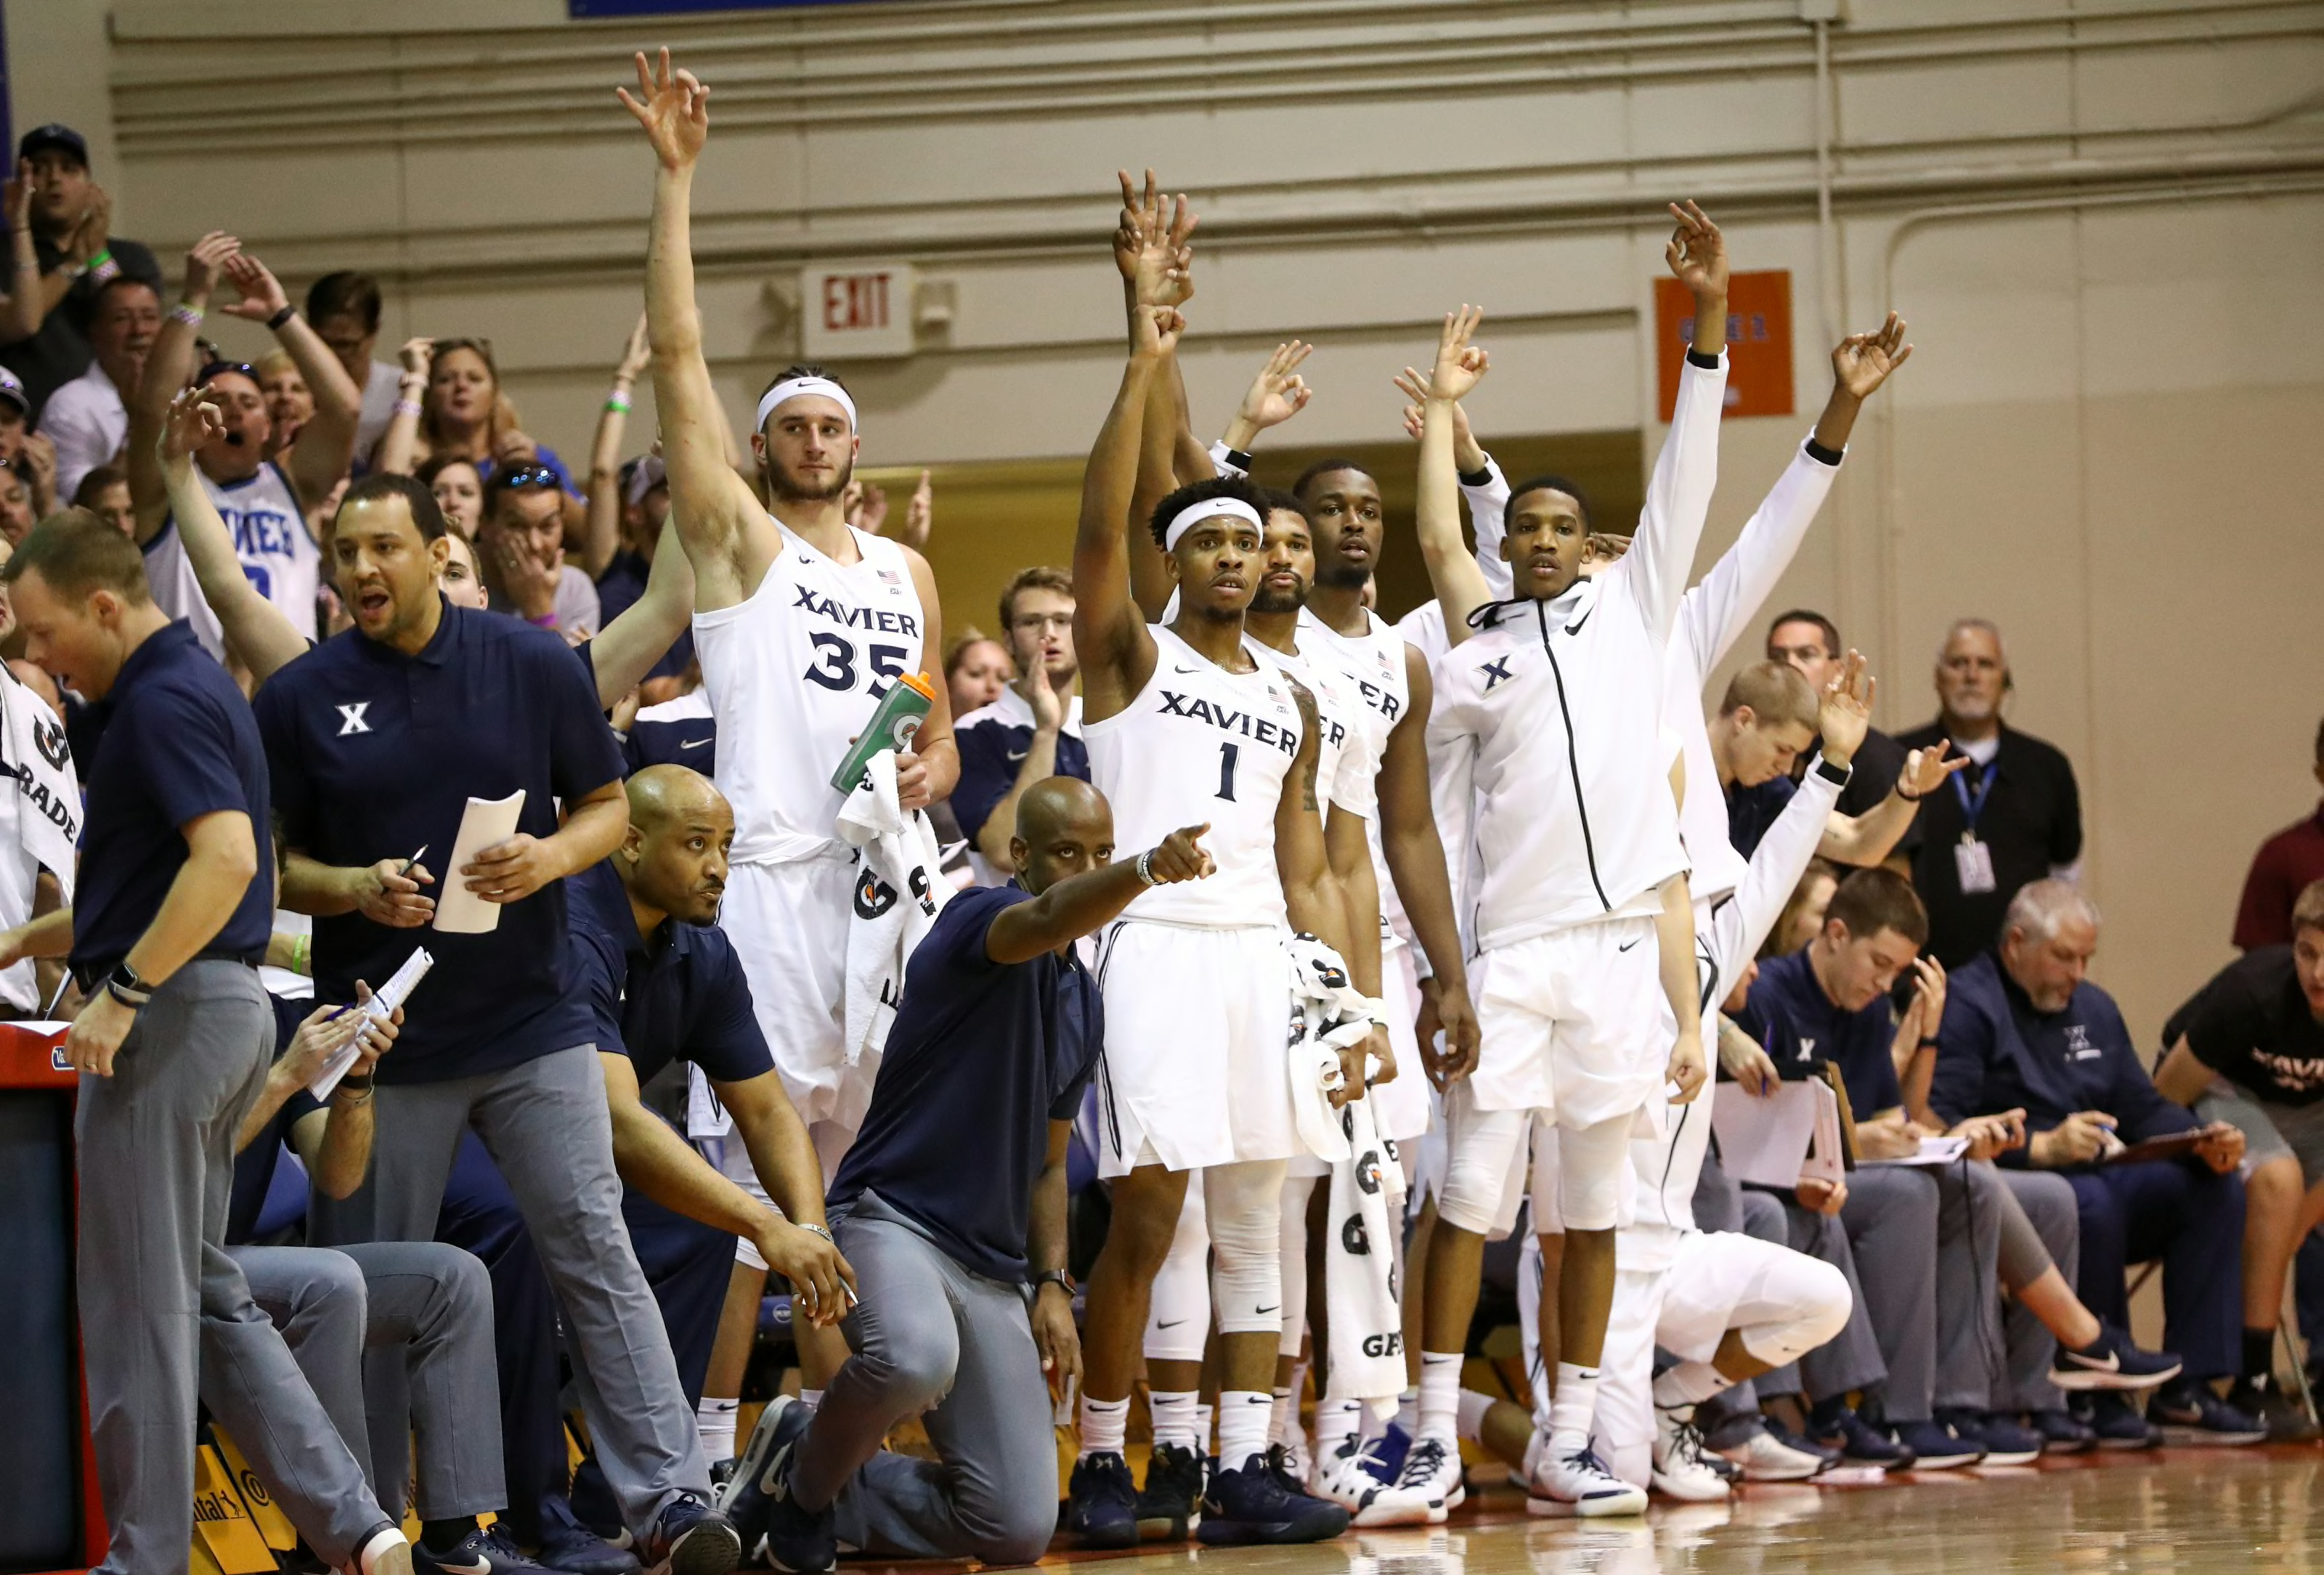 Xavier Basketball: 2019-20 season preview for the Musketeers - Page 7